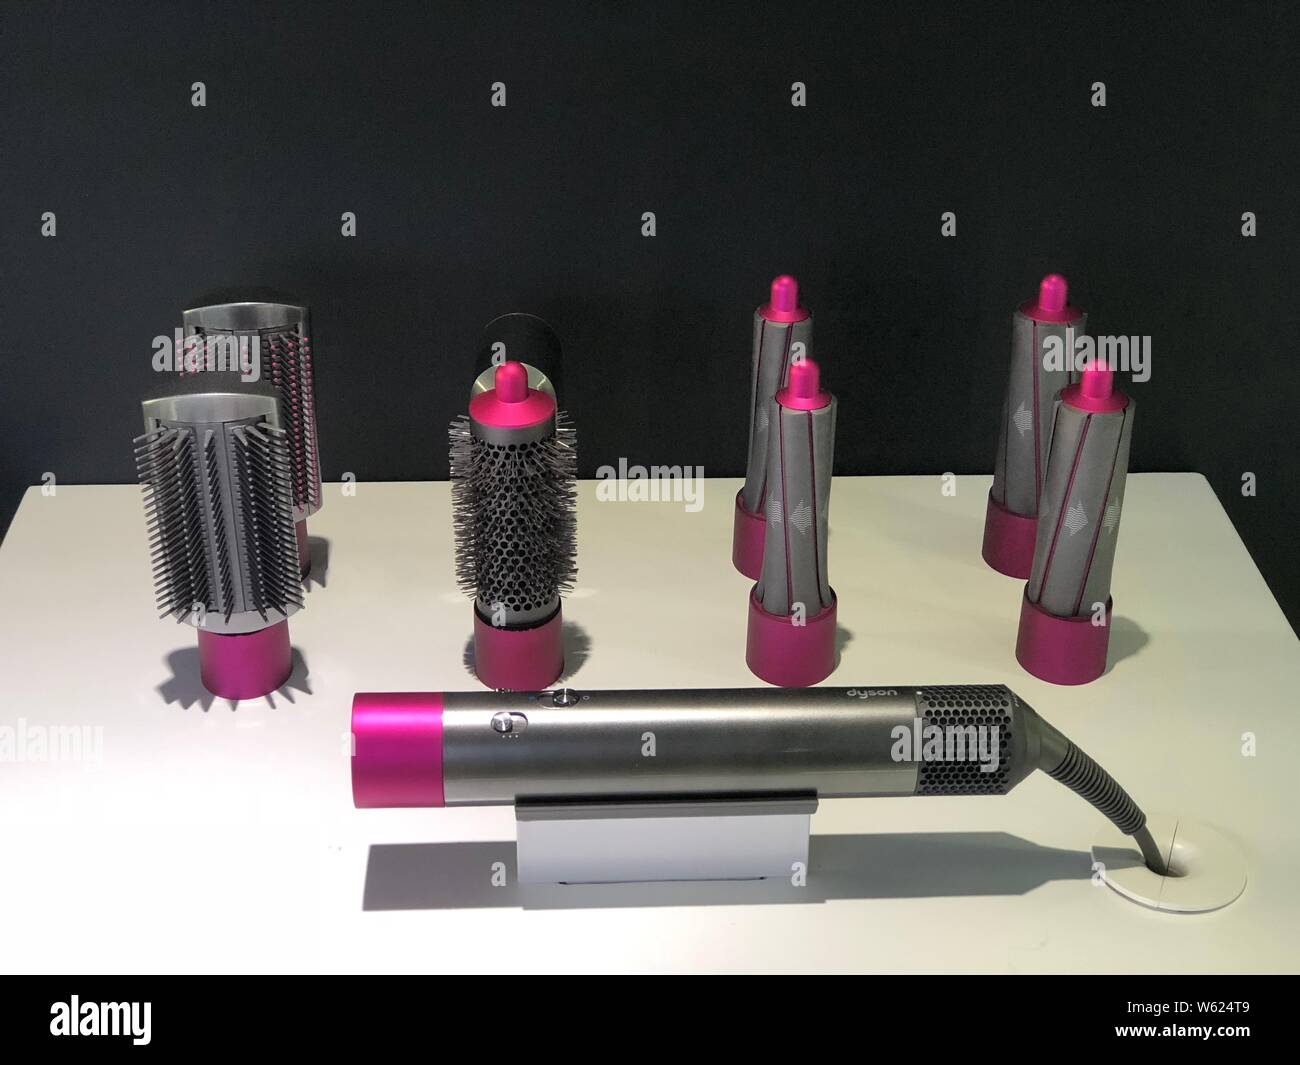 The newly-released Dyson Airwrap Styler is on display at the press  conference in Beijing, China, 18 October 2018. Dyson has released a hair  styling Stock Photo - Alamy